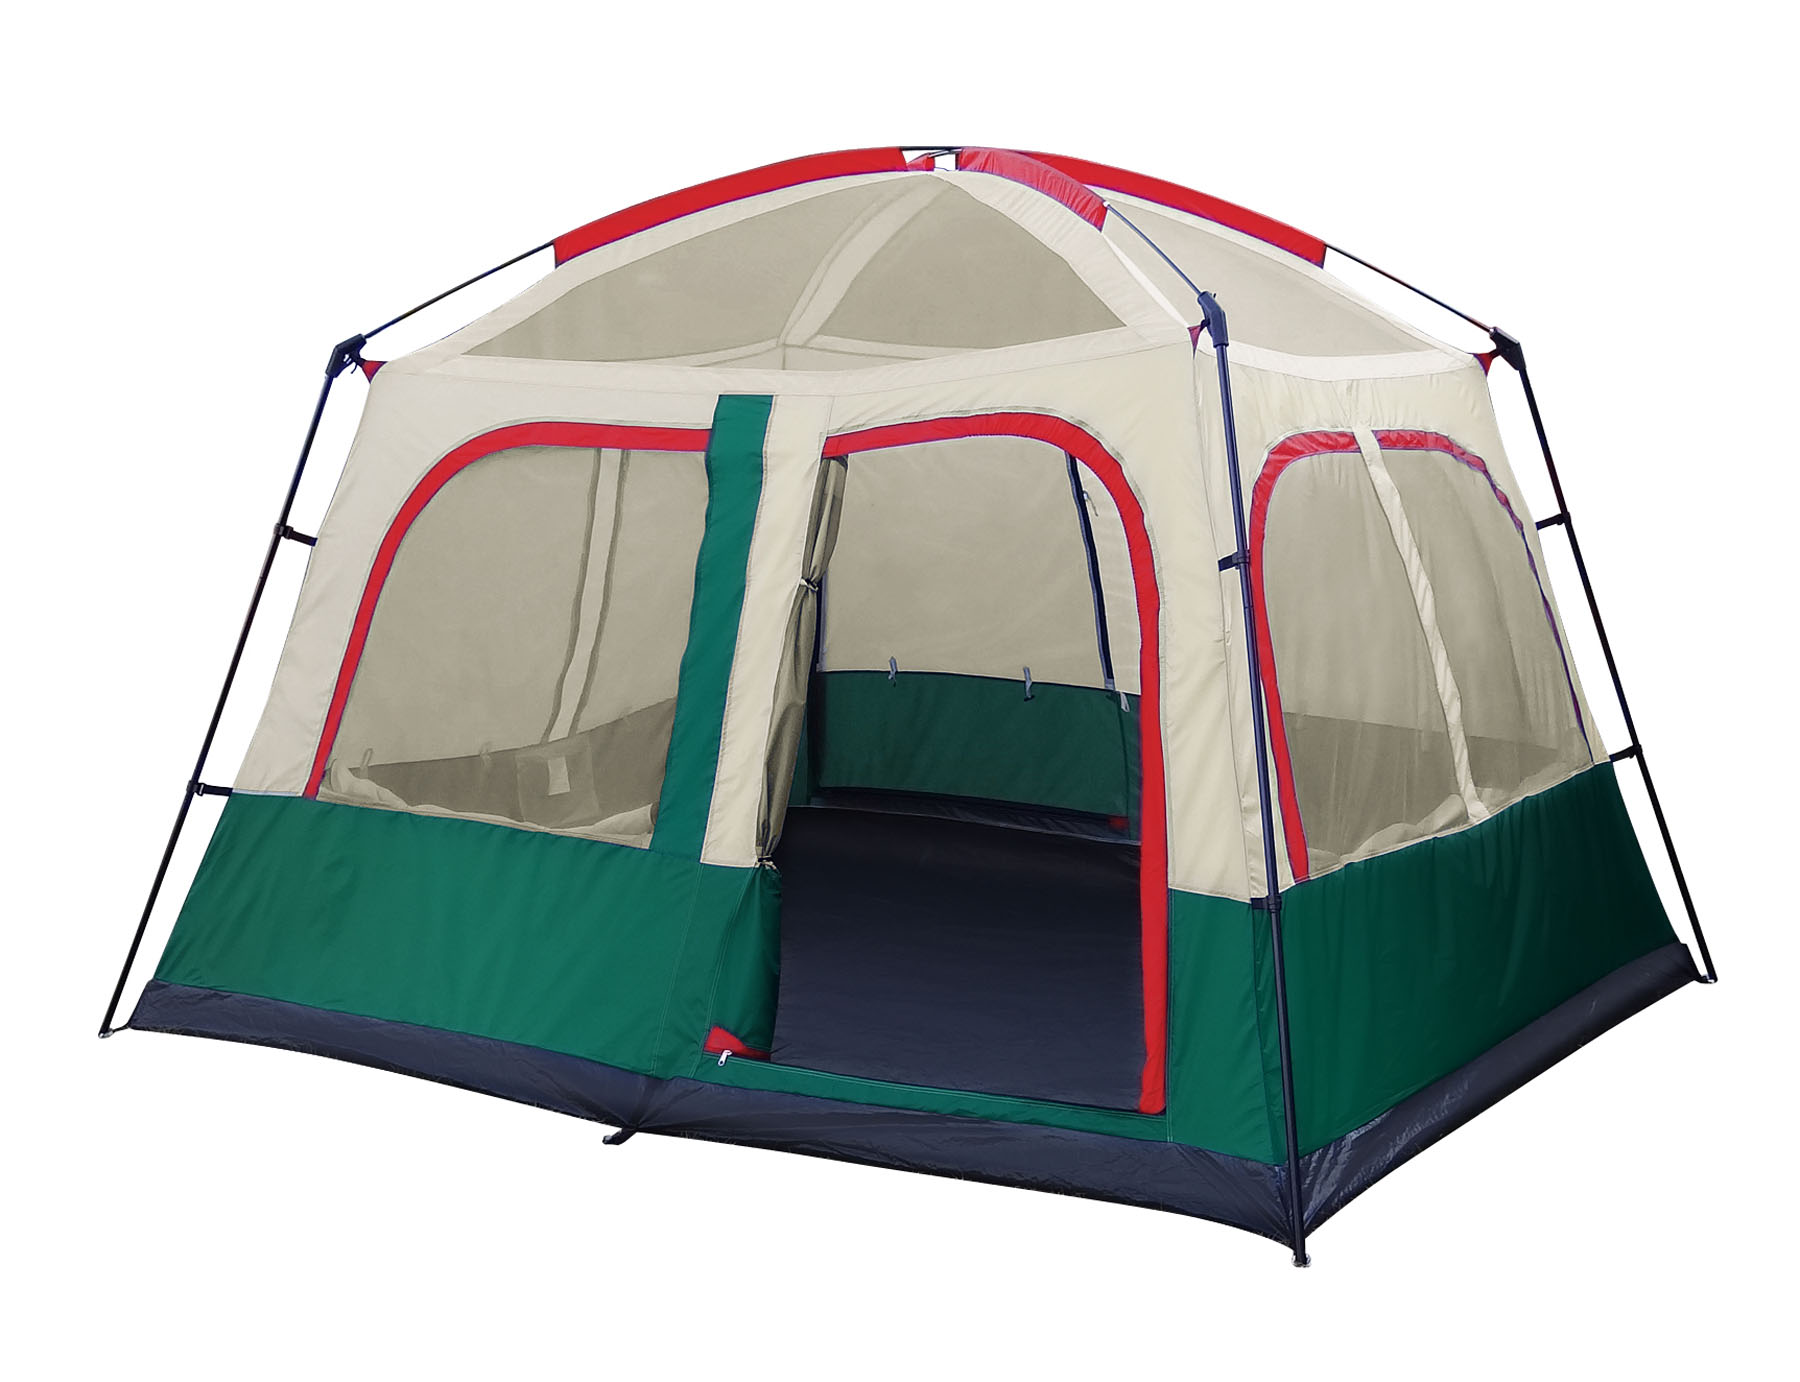 Gigatent Prospect Rock 4-5 Person Family Camping Tent - image 2 of 5